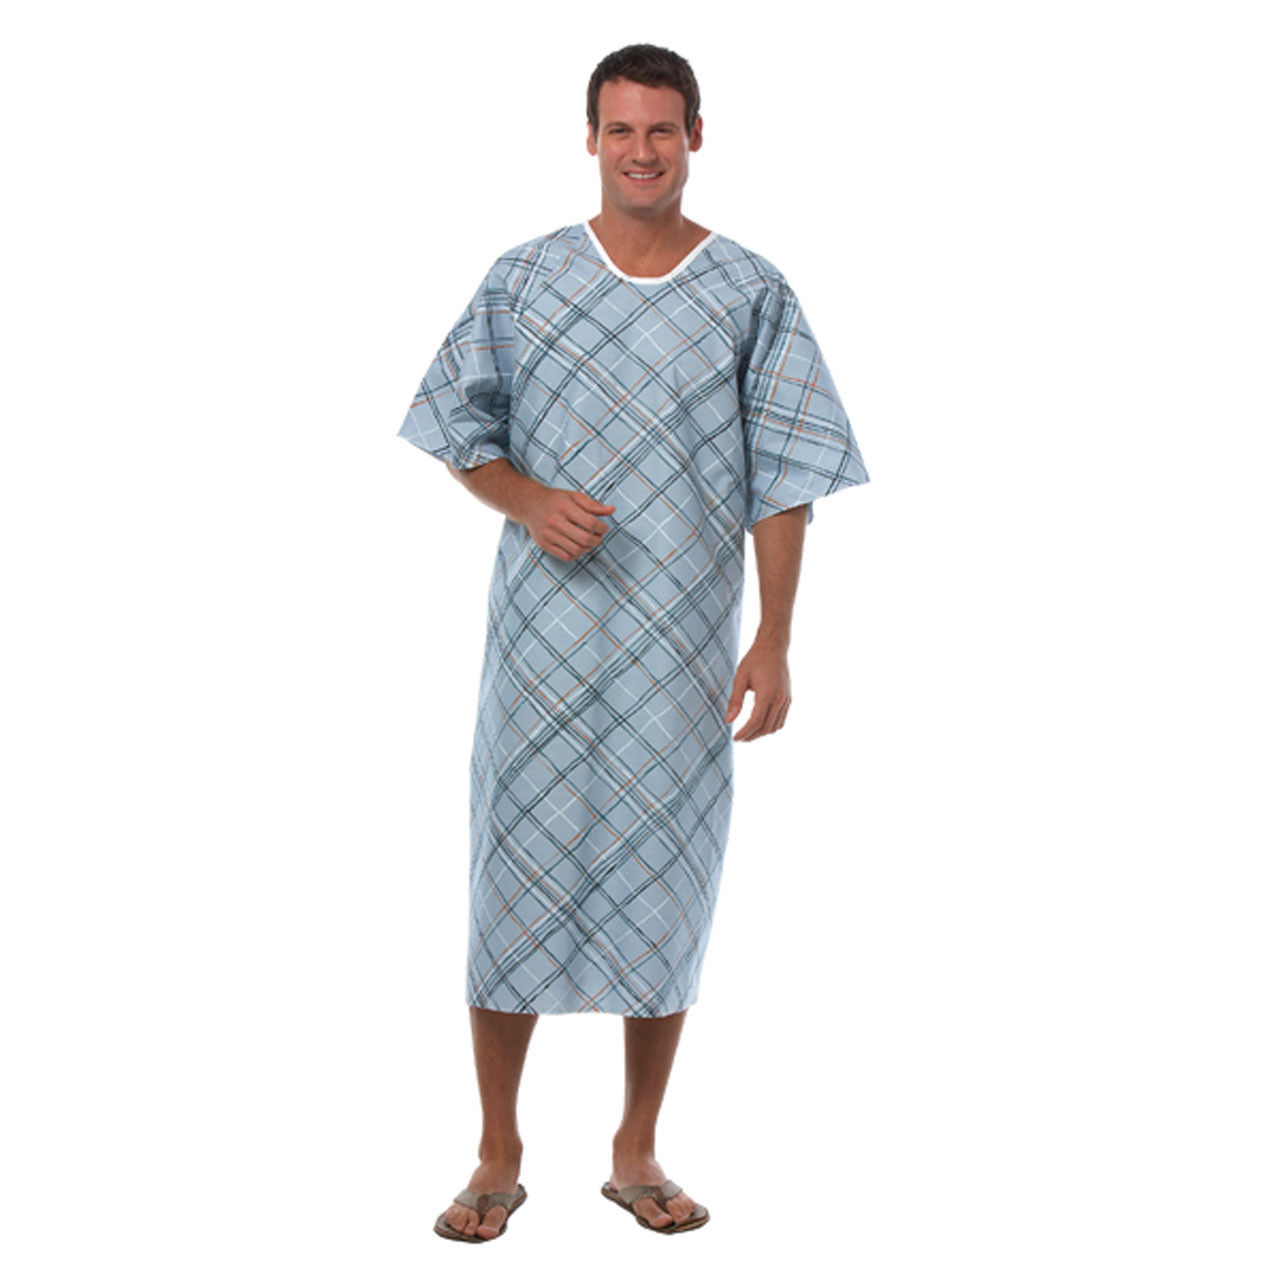 Does the design of the hospital gown ensure complete patient coverage?